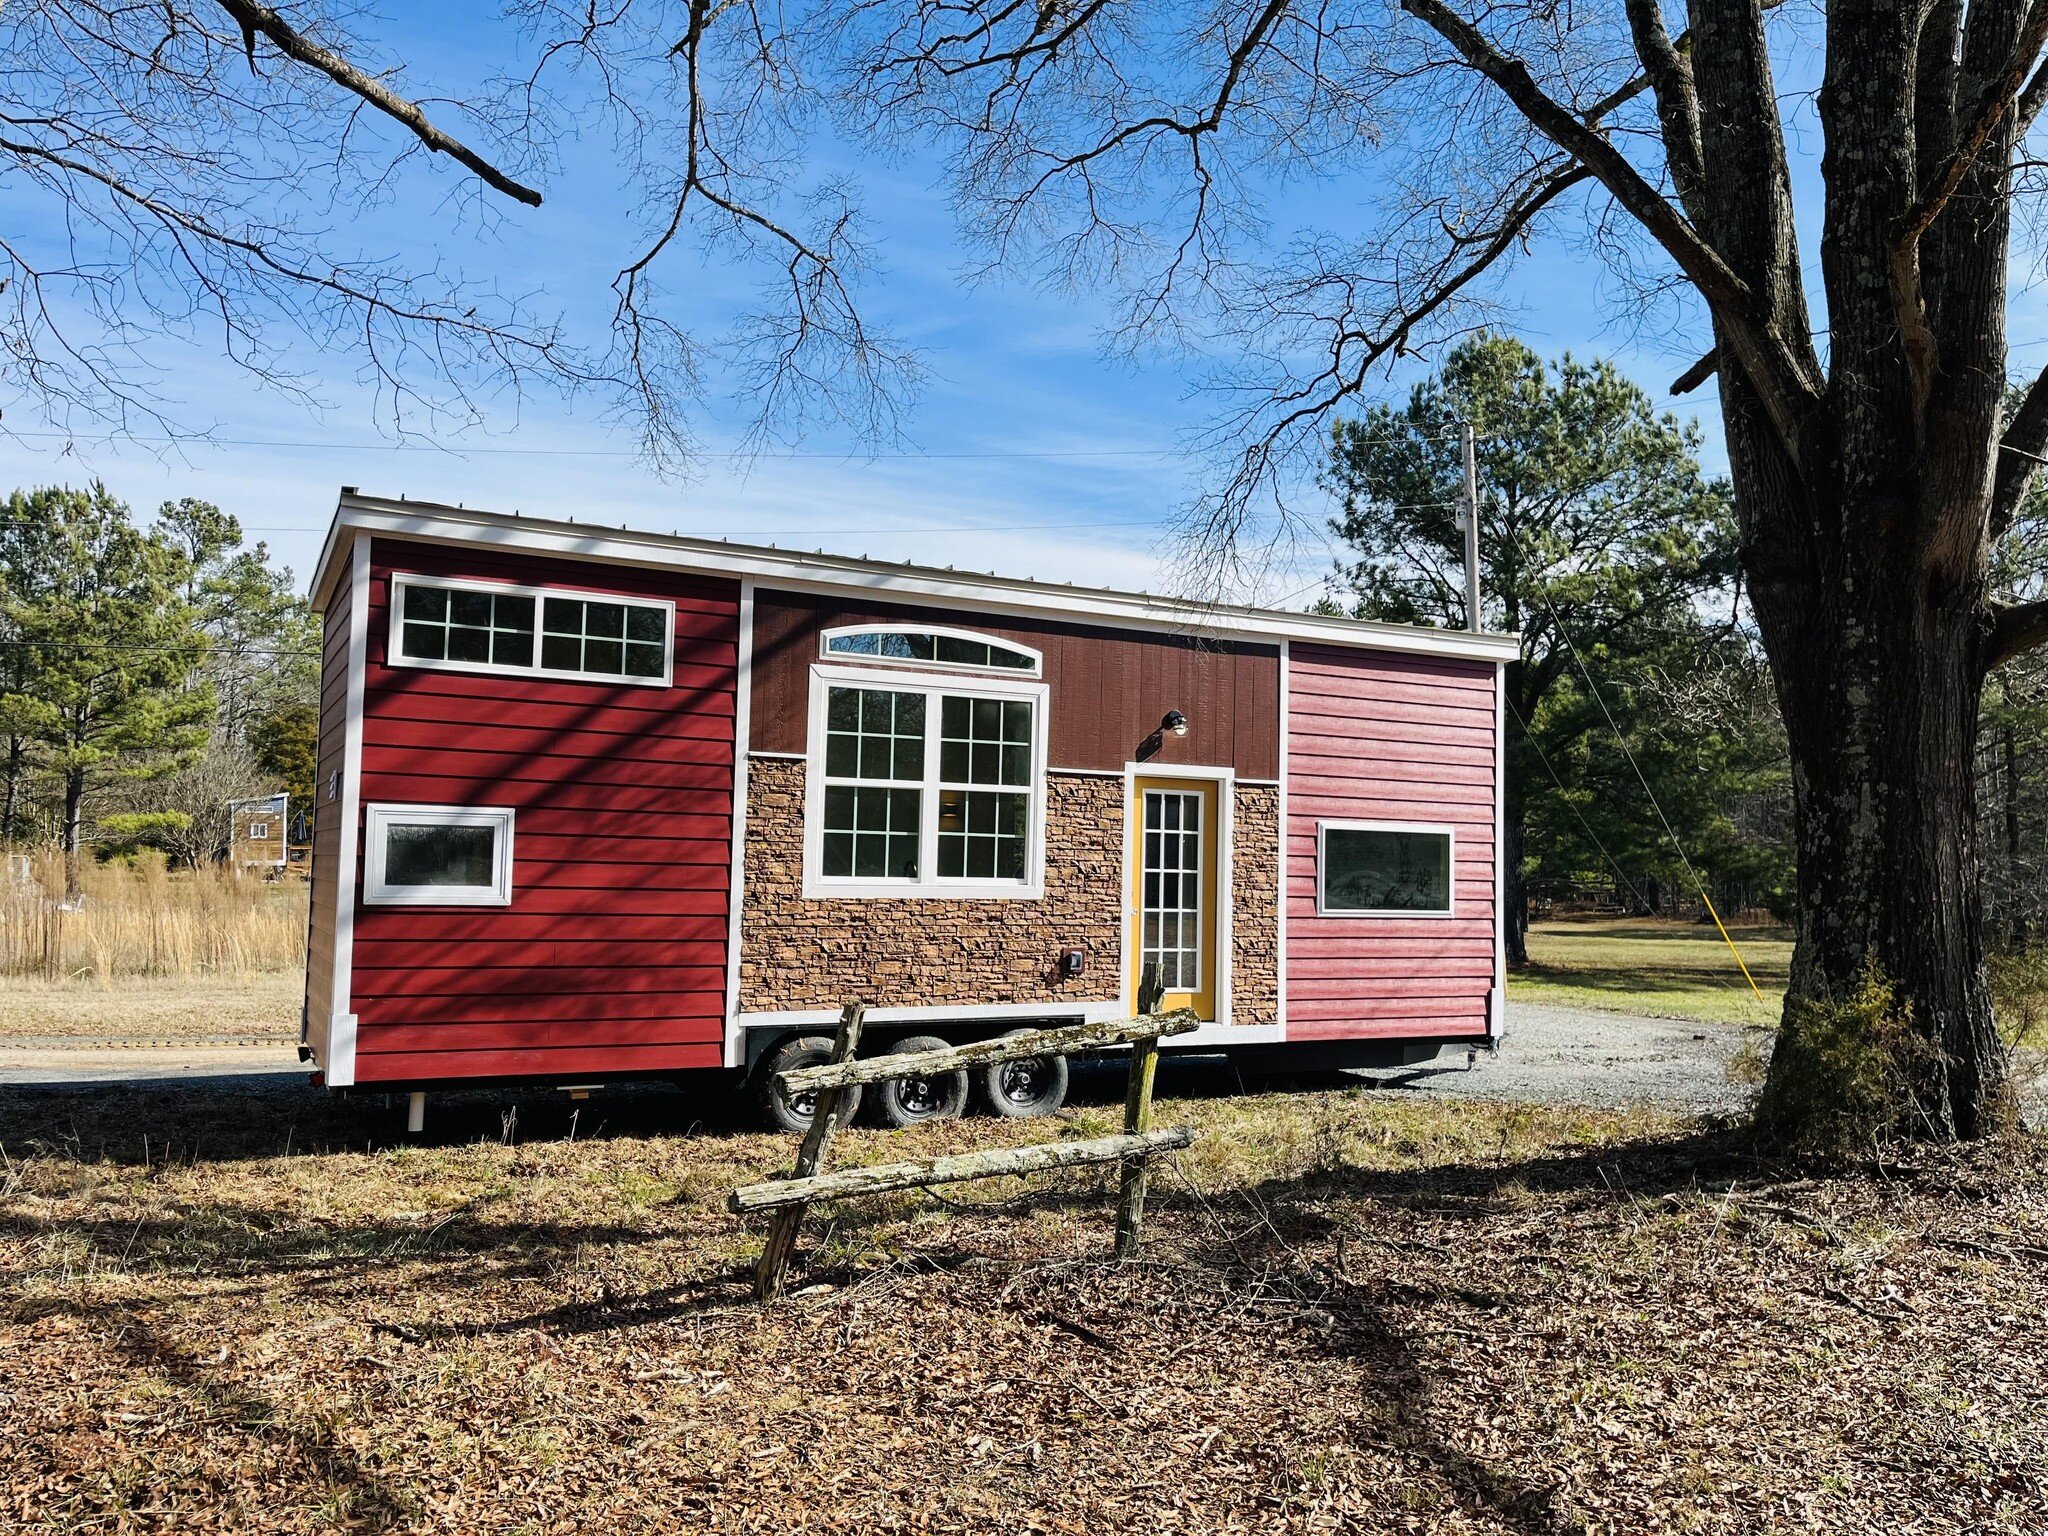 TINY HOME SPOTLIGHT: Big Red 32'

This home will not last long! Featuring custom tile work, exposed wood accents, and gold undertones, this home creates the perfect space to enjoy Lake Hartwell. A spacious master bedroom and the large loft above the 